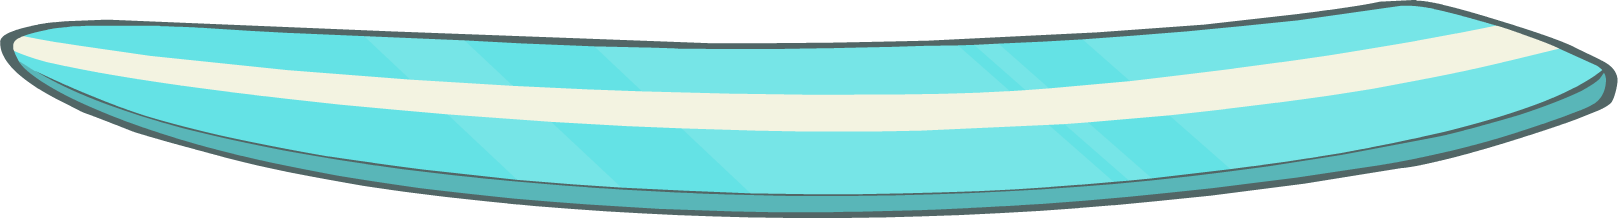 A Blue And White Striped Object